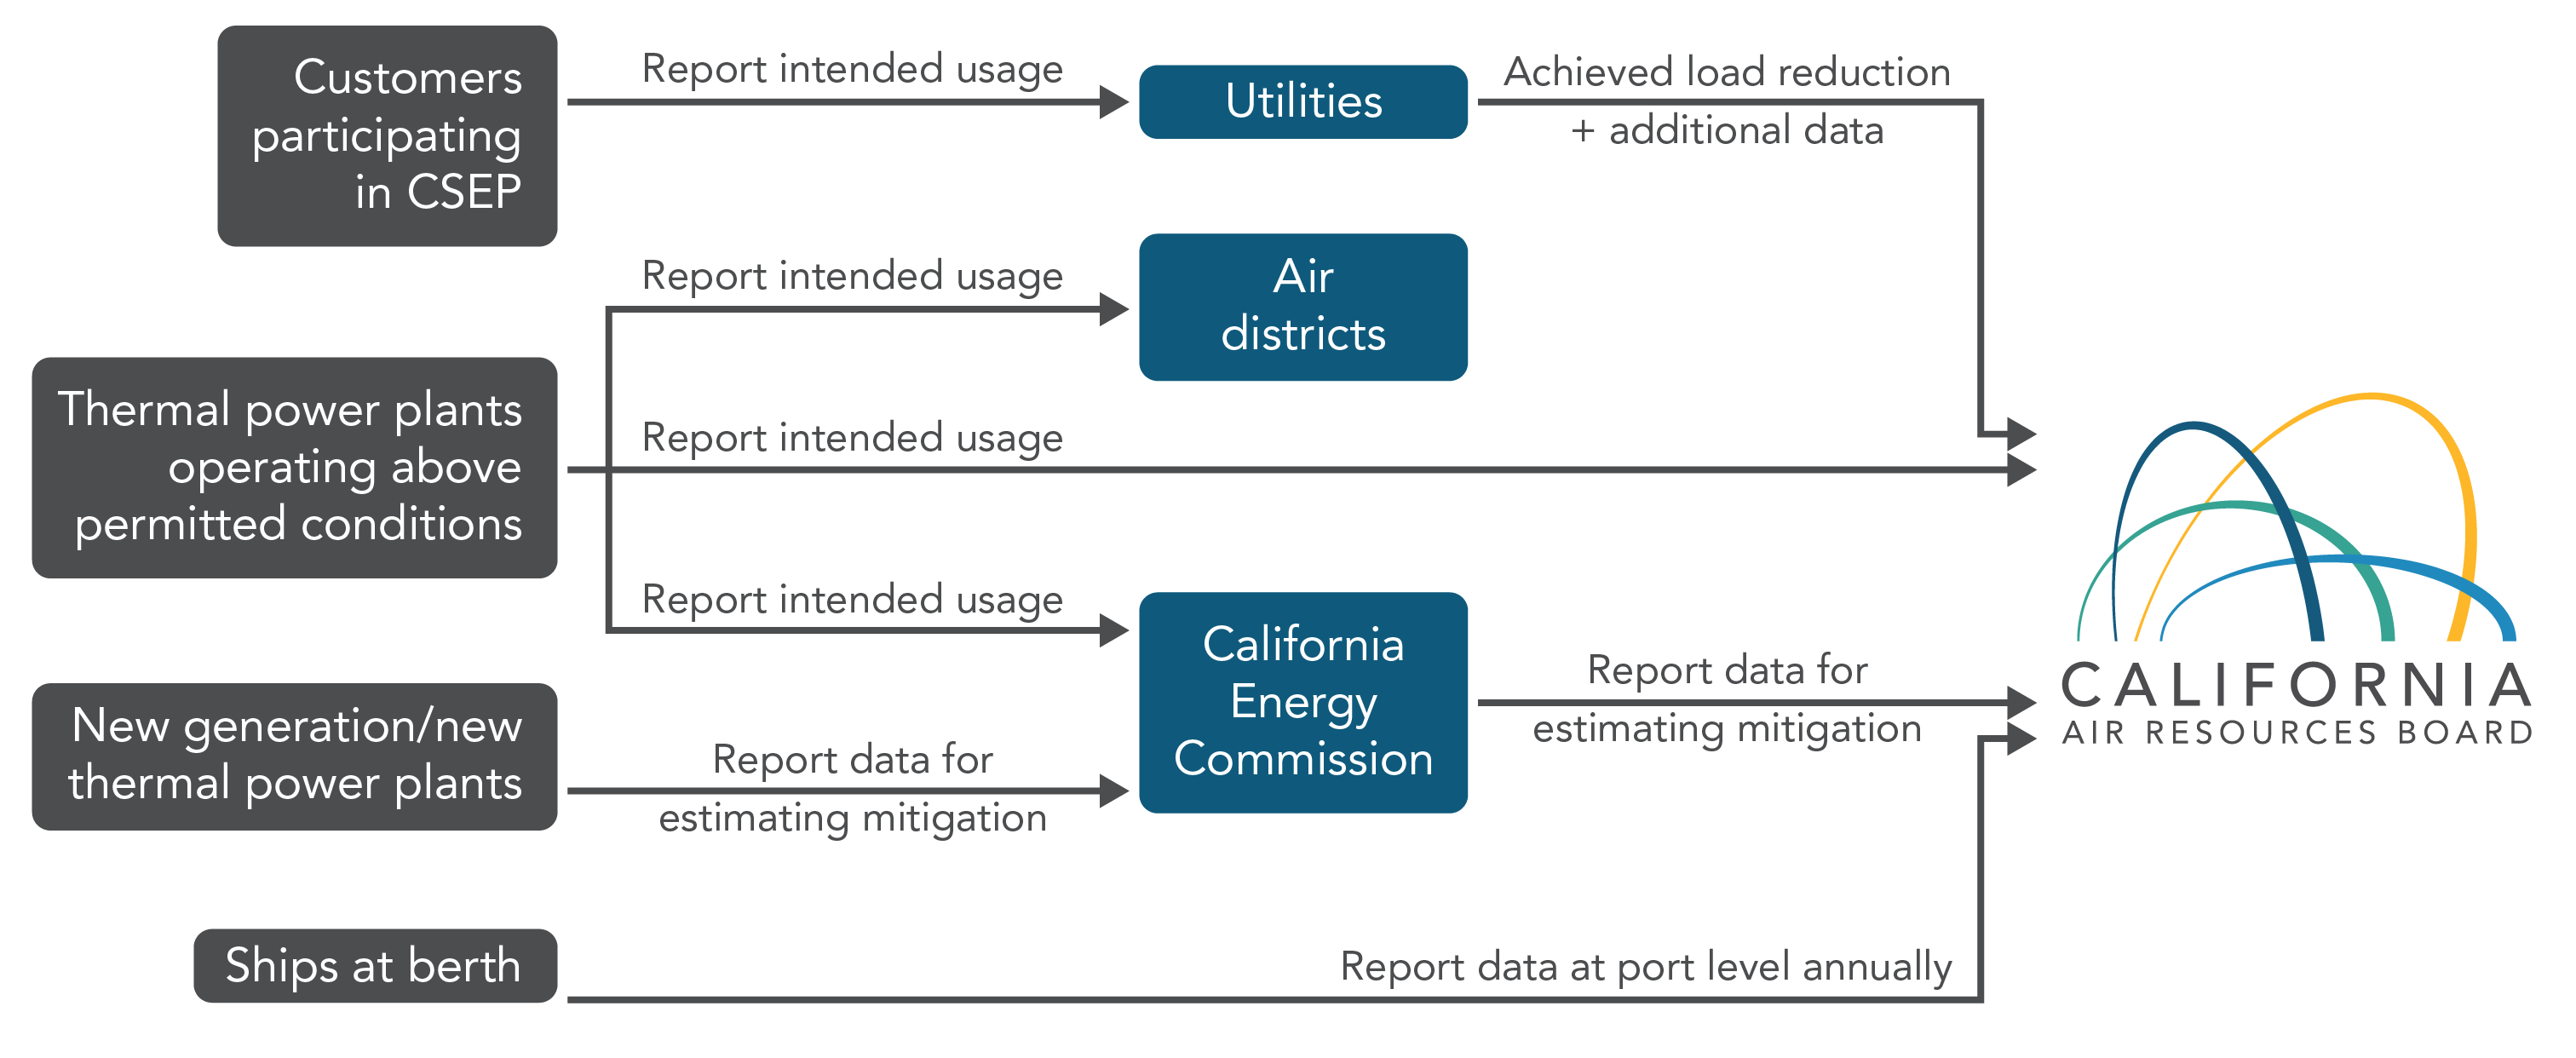 CHIRP reporting process flow diagram. The proclamation requires that all usage of these backup systems ultimately gets reported to CARB, however depending on the situation and equipment used, there may be different reporting requirements. Customers reporting in CSEP (The California State Emergency Program) report what they intend to use to their power utility company, who will report actual load reduction levels achieved and other data directly to CARB. Thermal power plants that operate above the permitted conditions report their additional usage to their Air District, to CARB, and to the California Energy Commission. New generation and new thermal power plants report data they have for estimating mitigation of their extra emissions to the California Energy Commission, who will then report the data needed for estimating mitigation to CARB.  